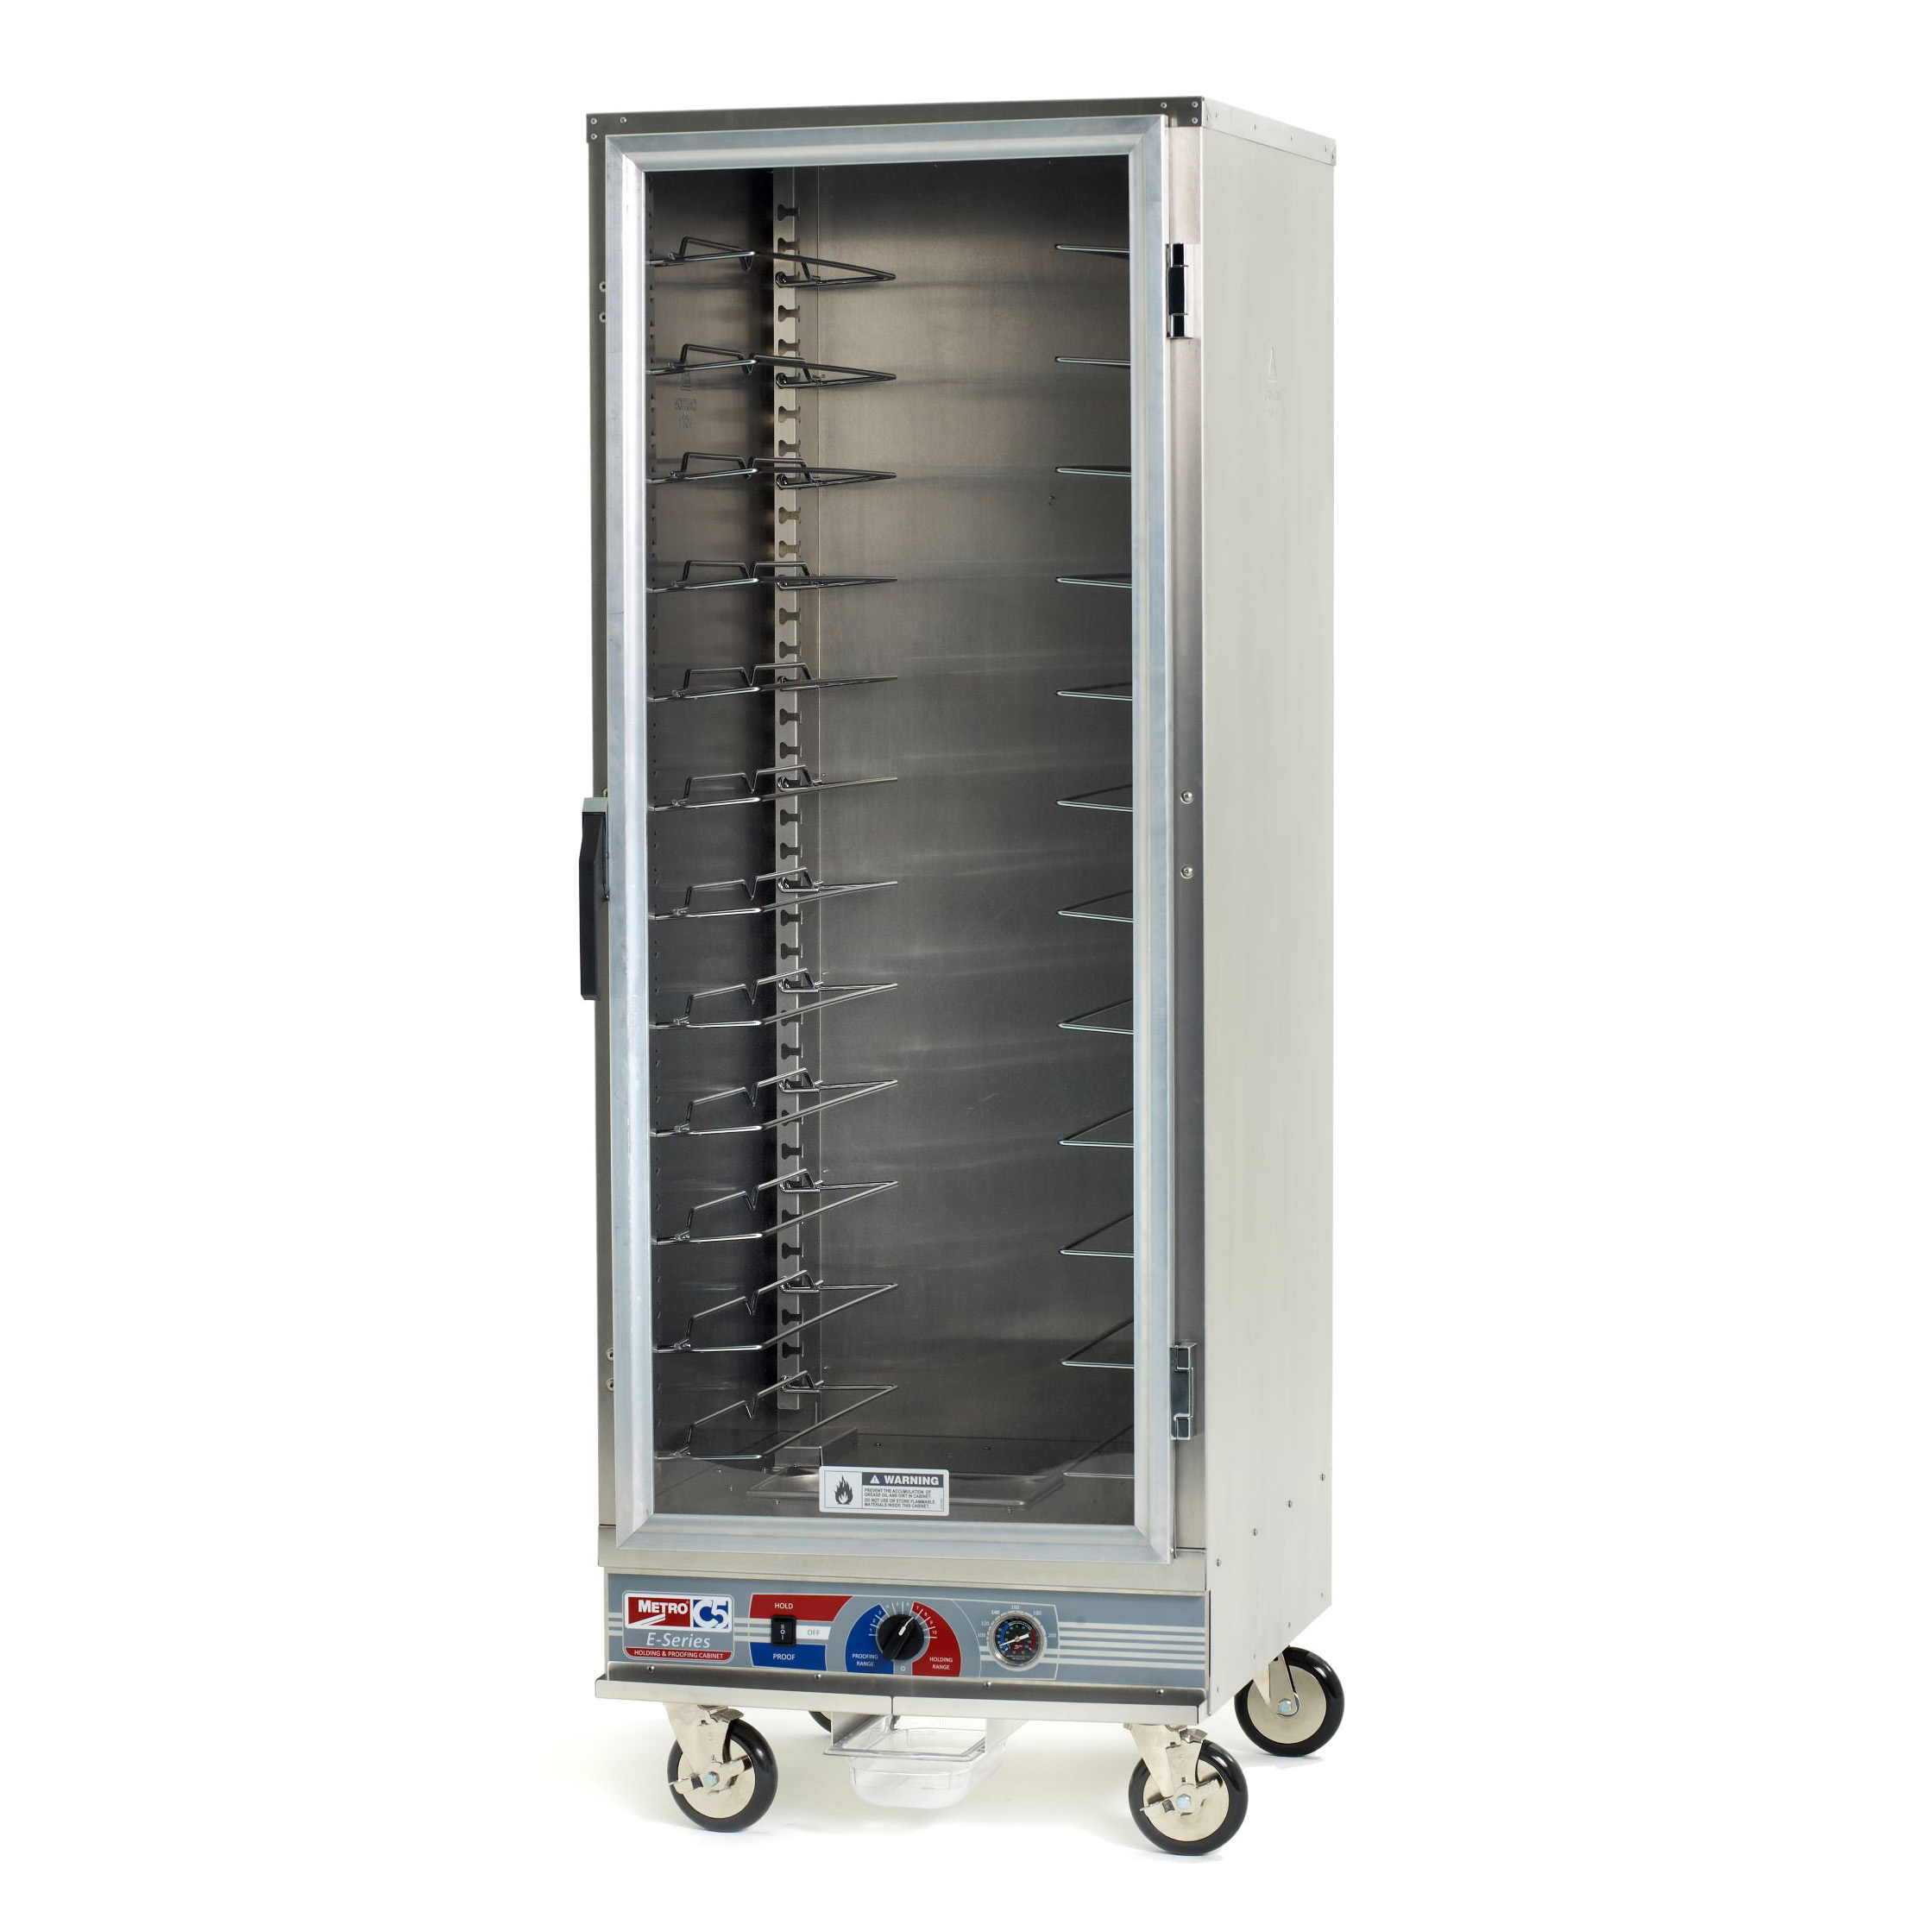 Metro C5E9-CFC-U C5 9 Series Insulated Mobile Proofing and Holding Cabinet